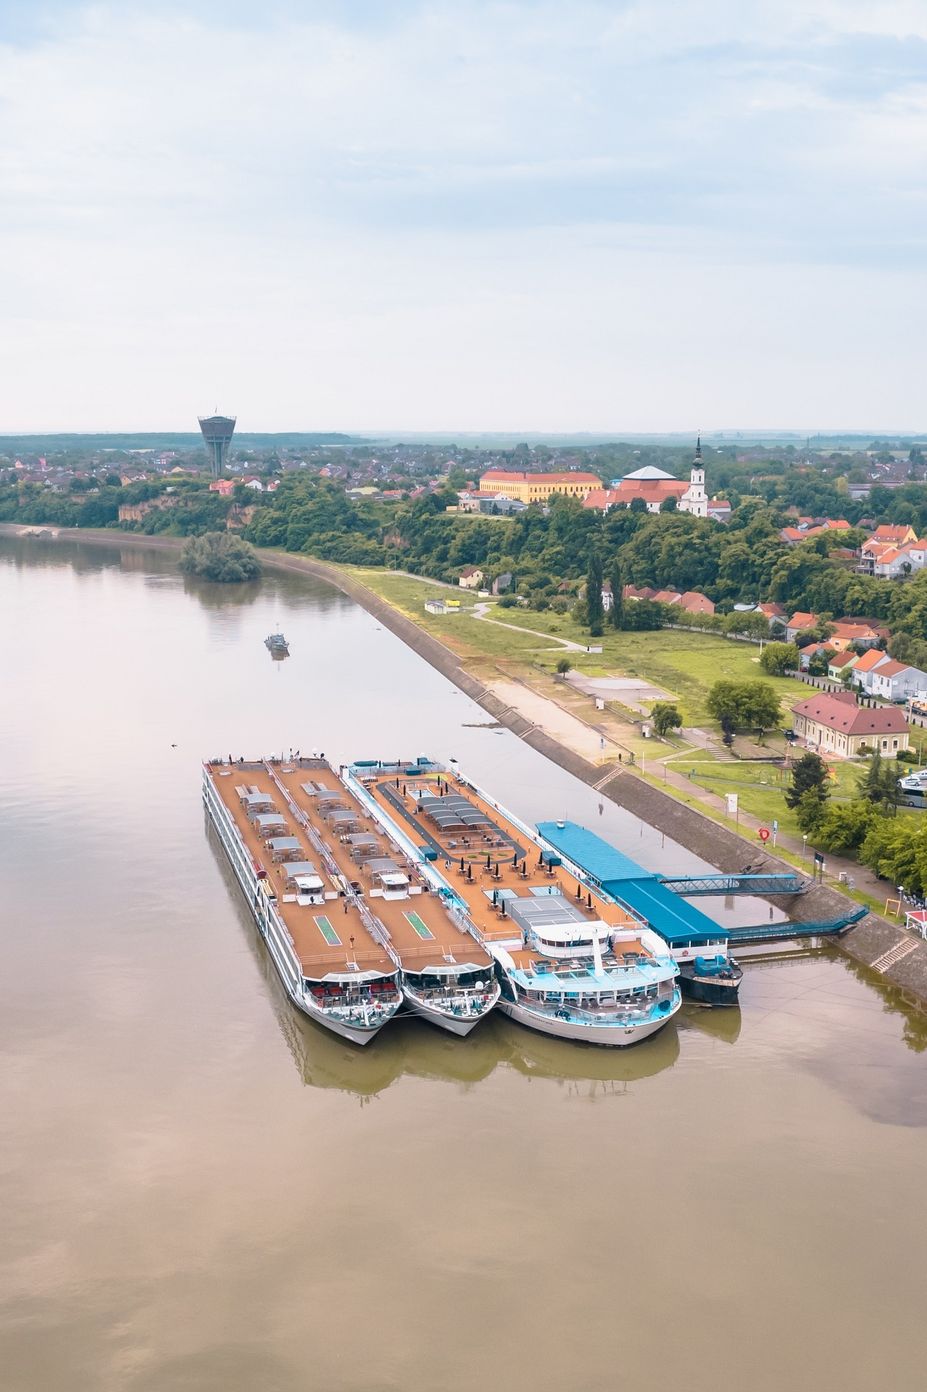 Tourism renaissance in Vukovar as visitor numbers surge